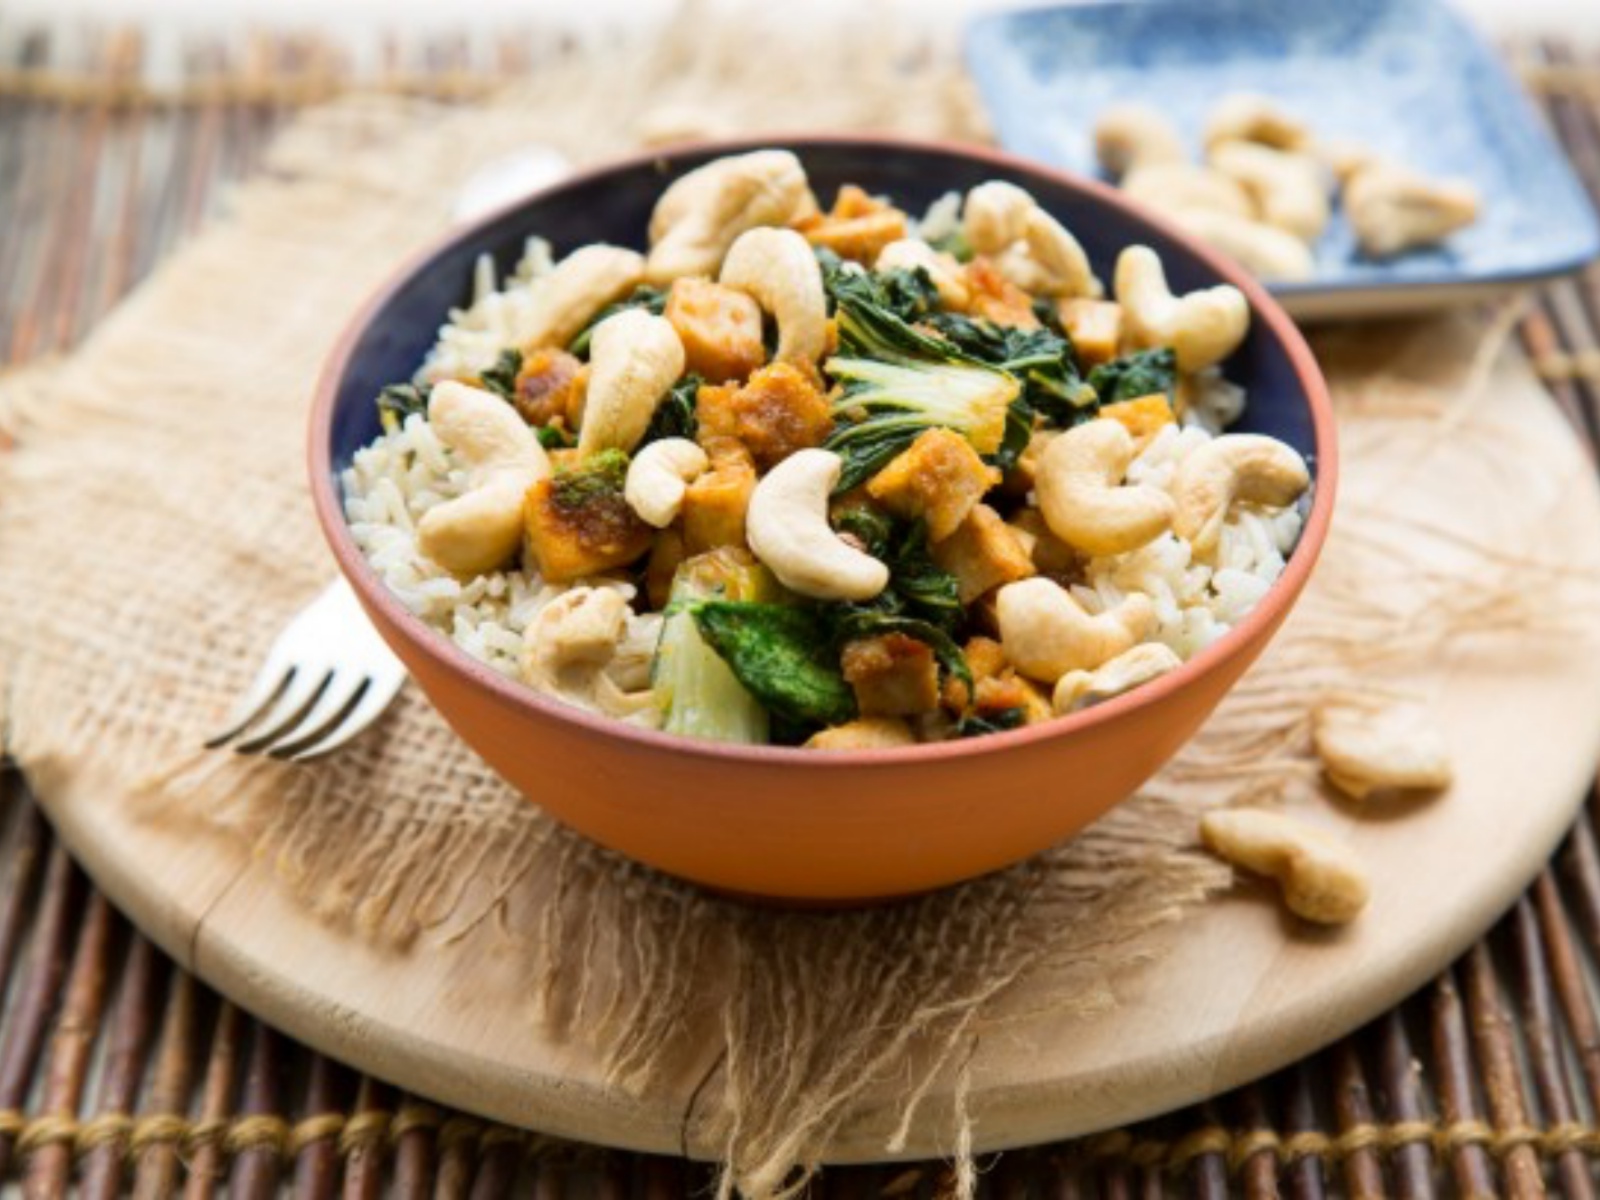 Ginger-Citrus Tofu Powerbowl with Bok Choy and Cashews